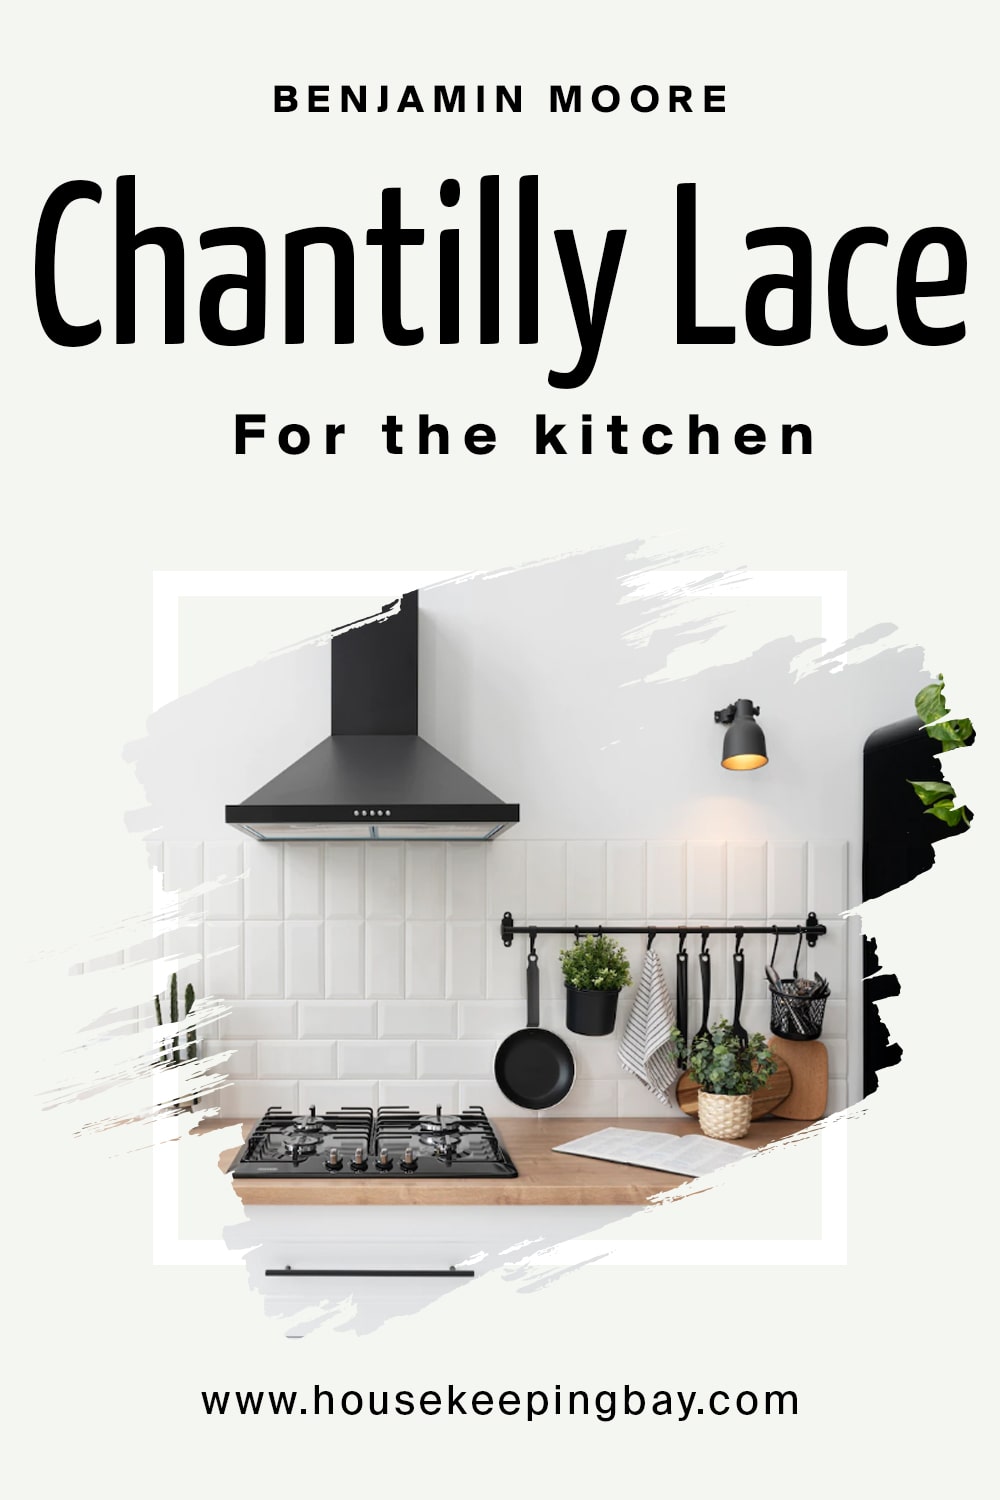 Benjamin Moore. Chantilly Lace For the kitchen